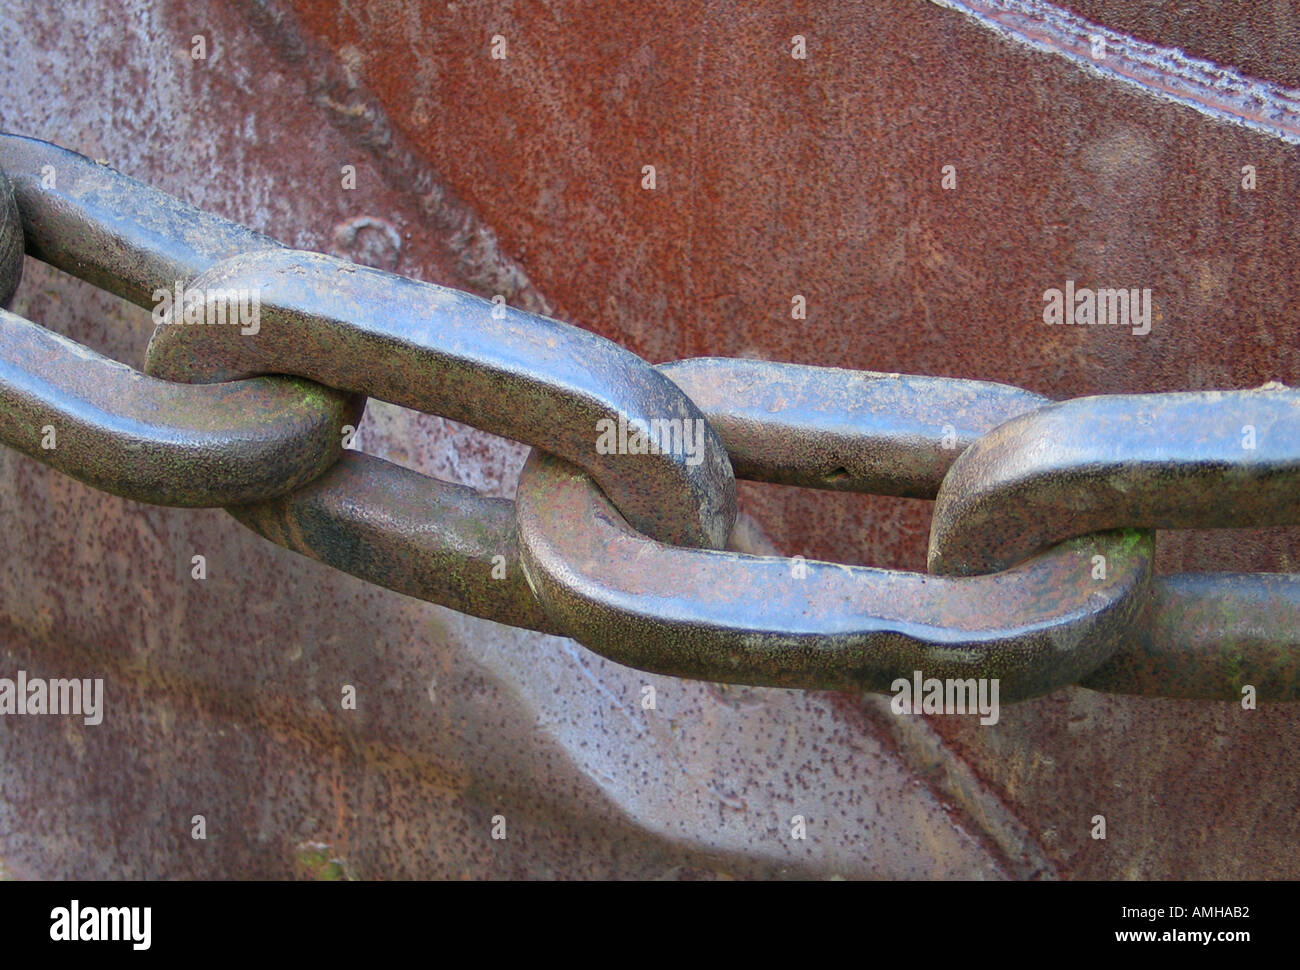 The chain on the bucket of a dragline used in scooping up iron ore rocks. Stock Photo